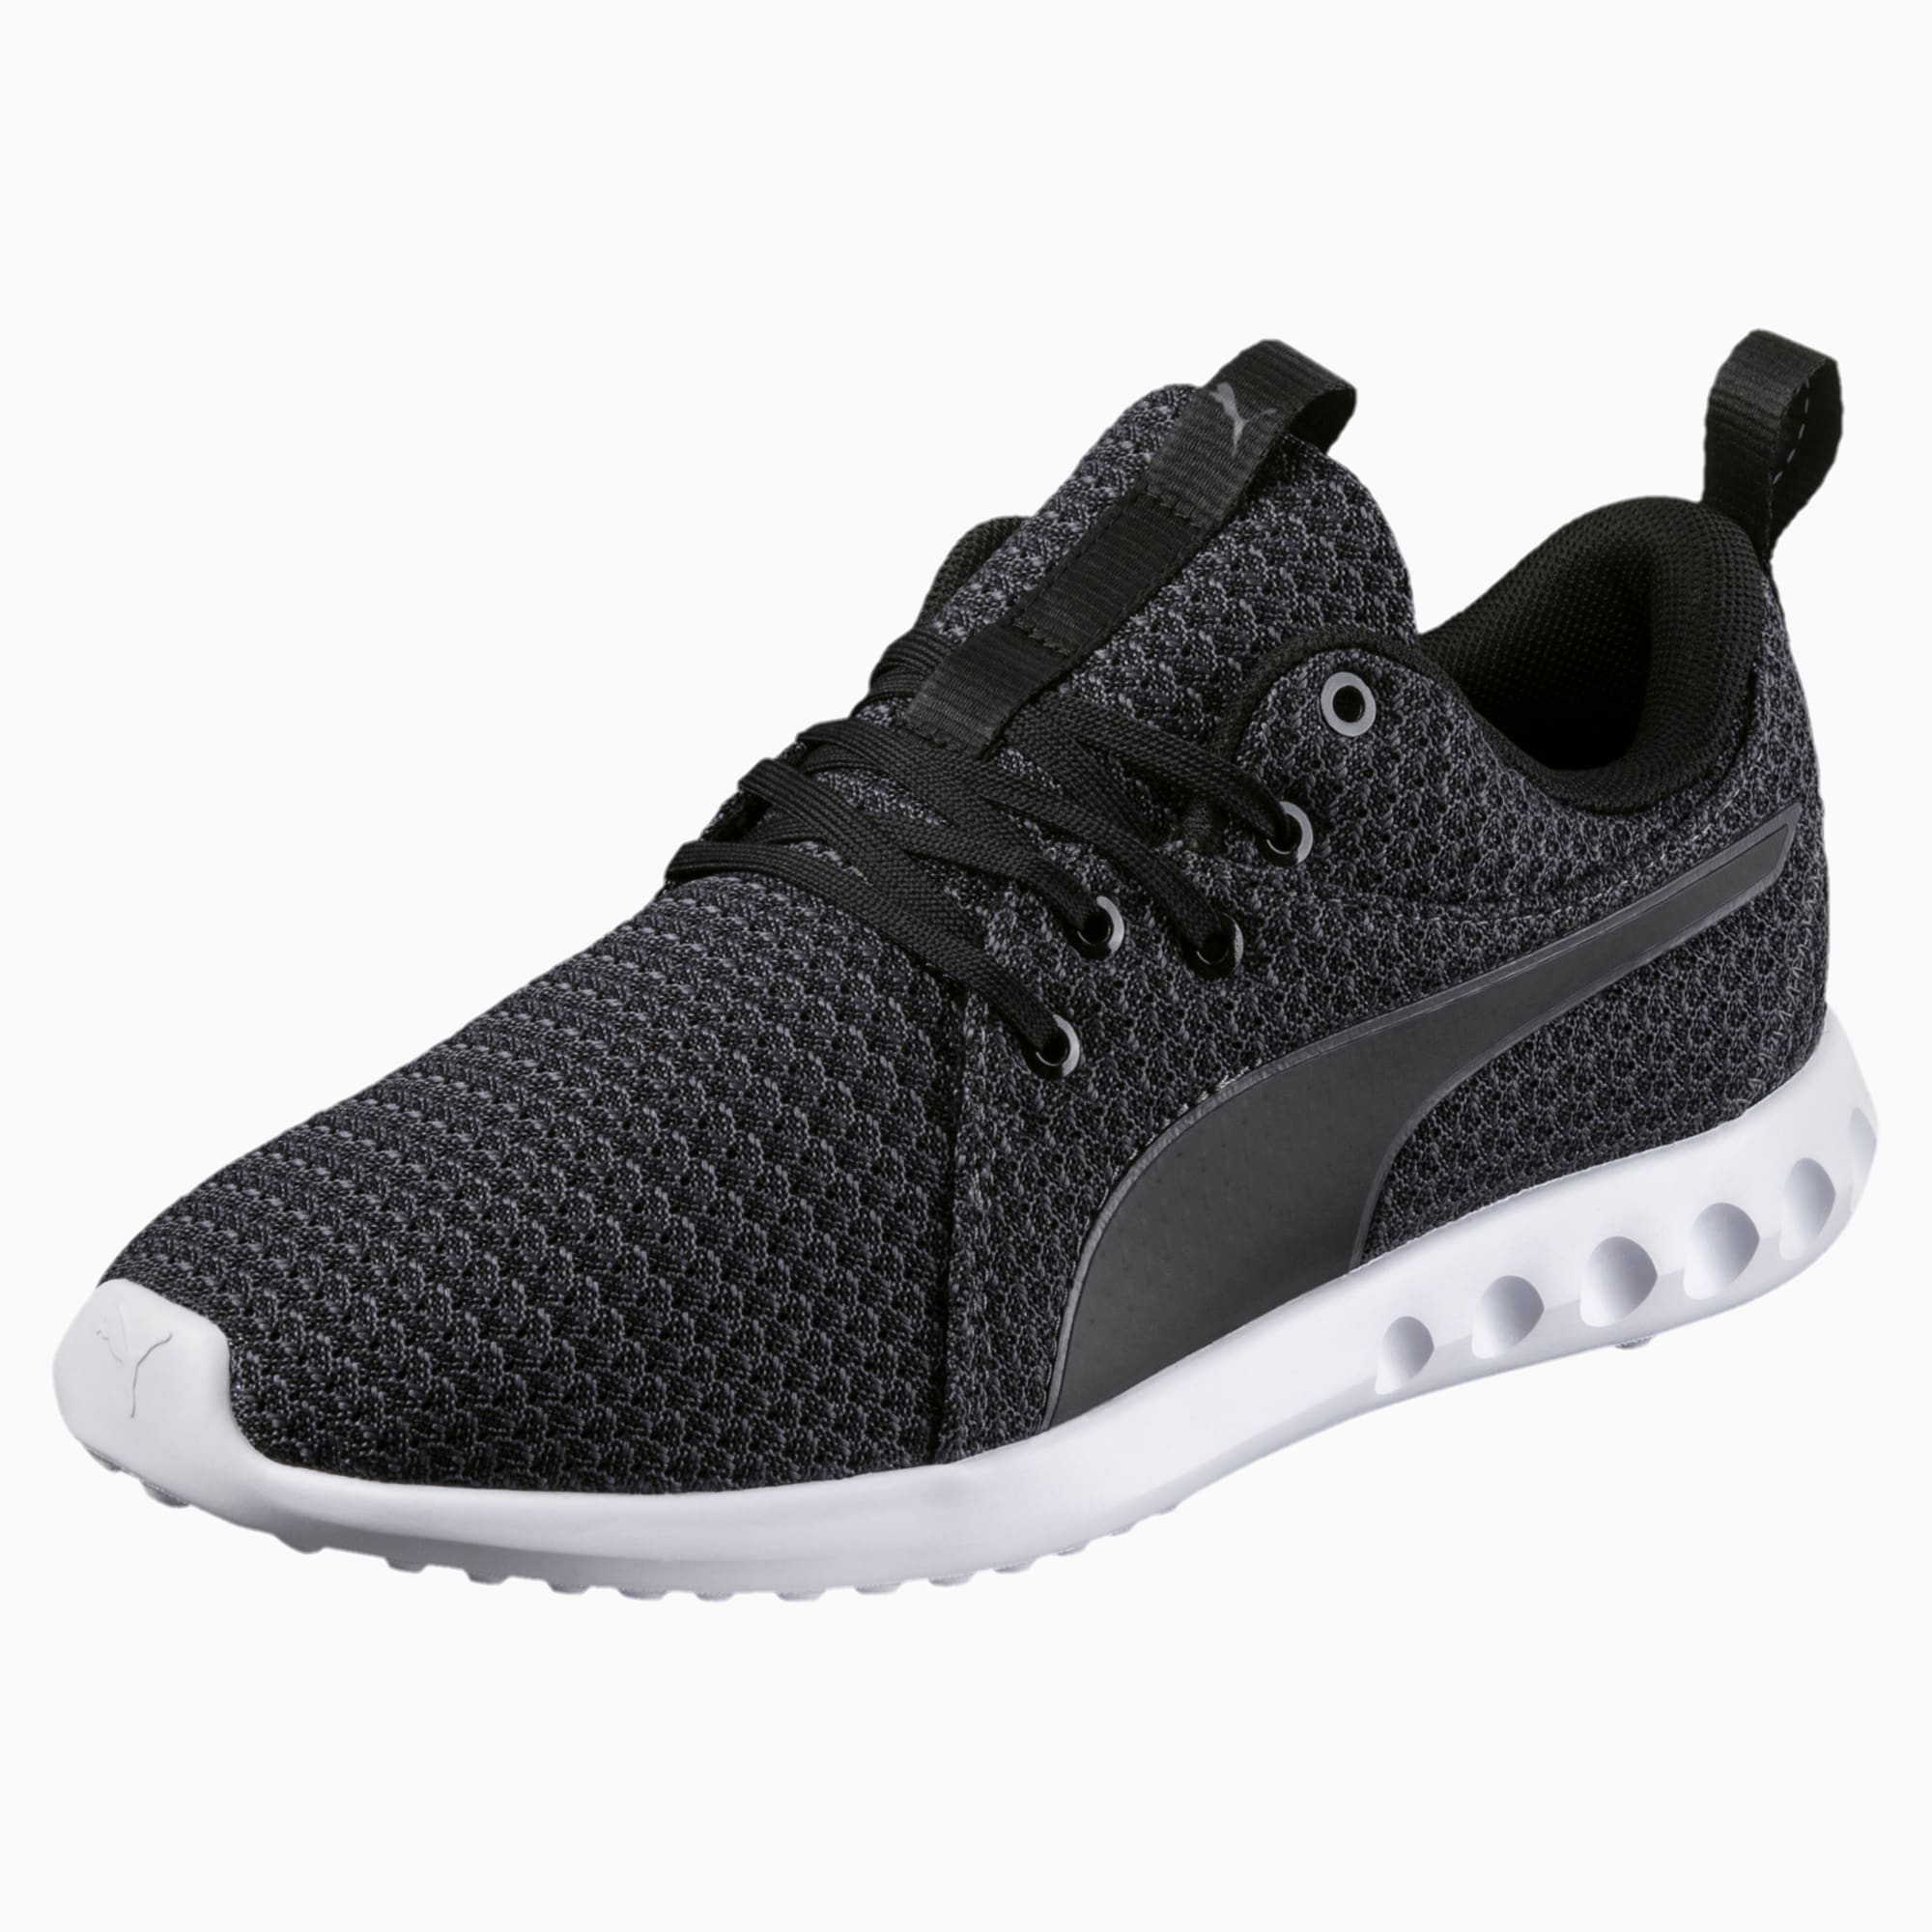 Carson 2 Knit Women's Running Shoes 